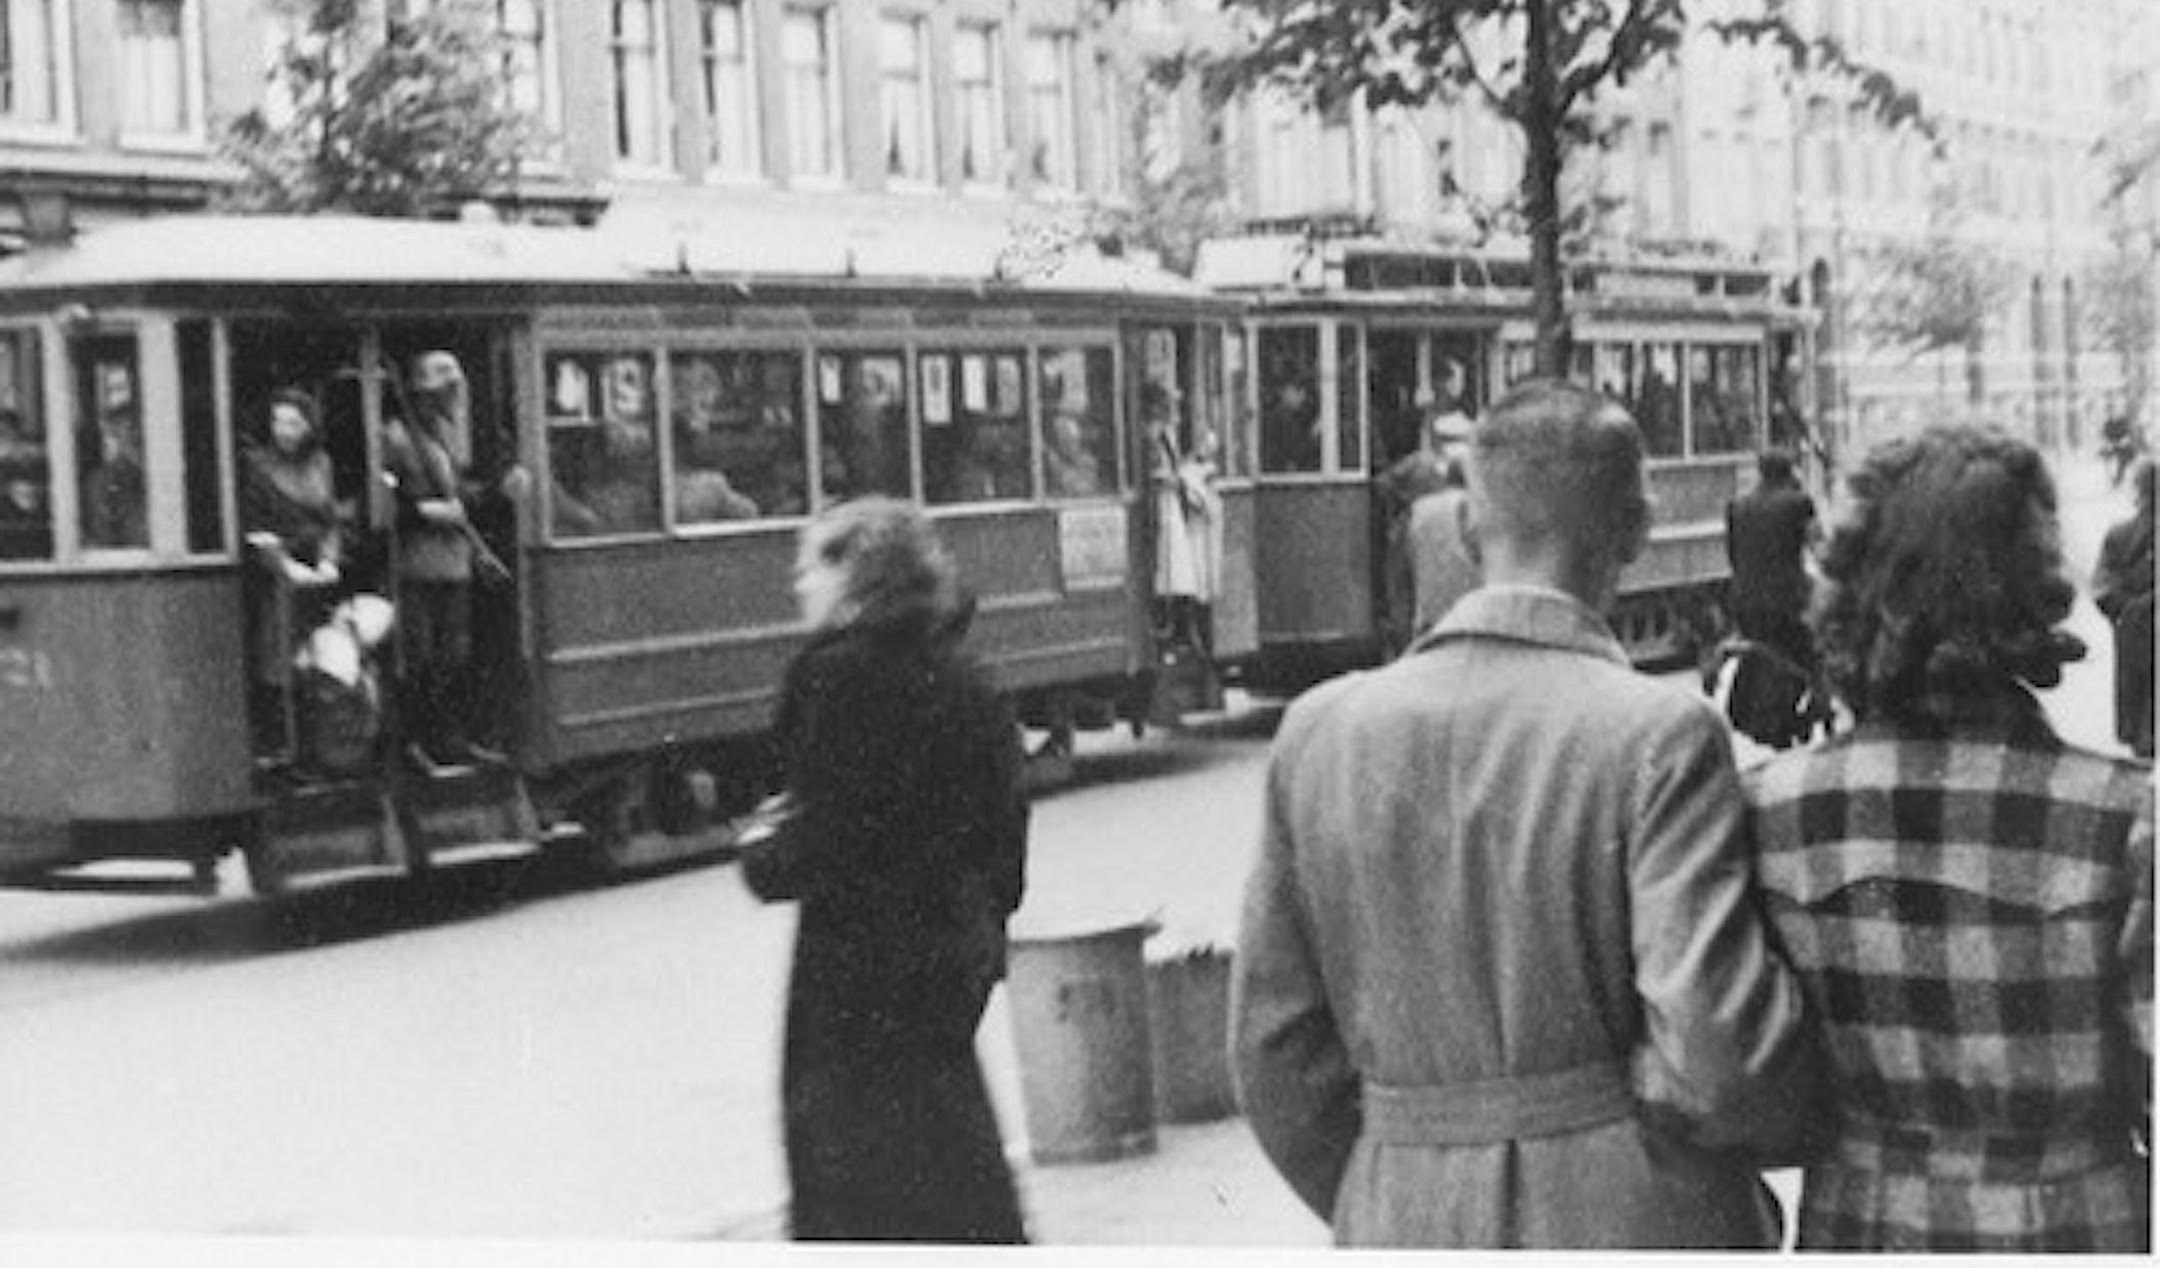 Nazis and their Dutch collaborators used the GVB public tram system to deport Dutch Jews during the Holocaust. (Courtesy Willy Lindwer)